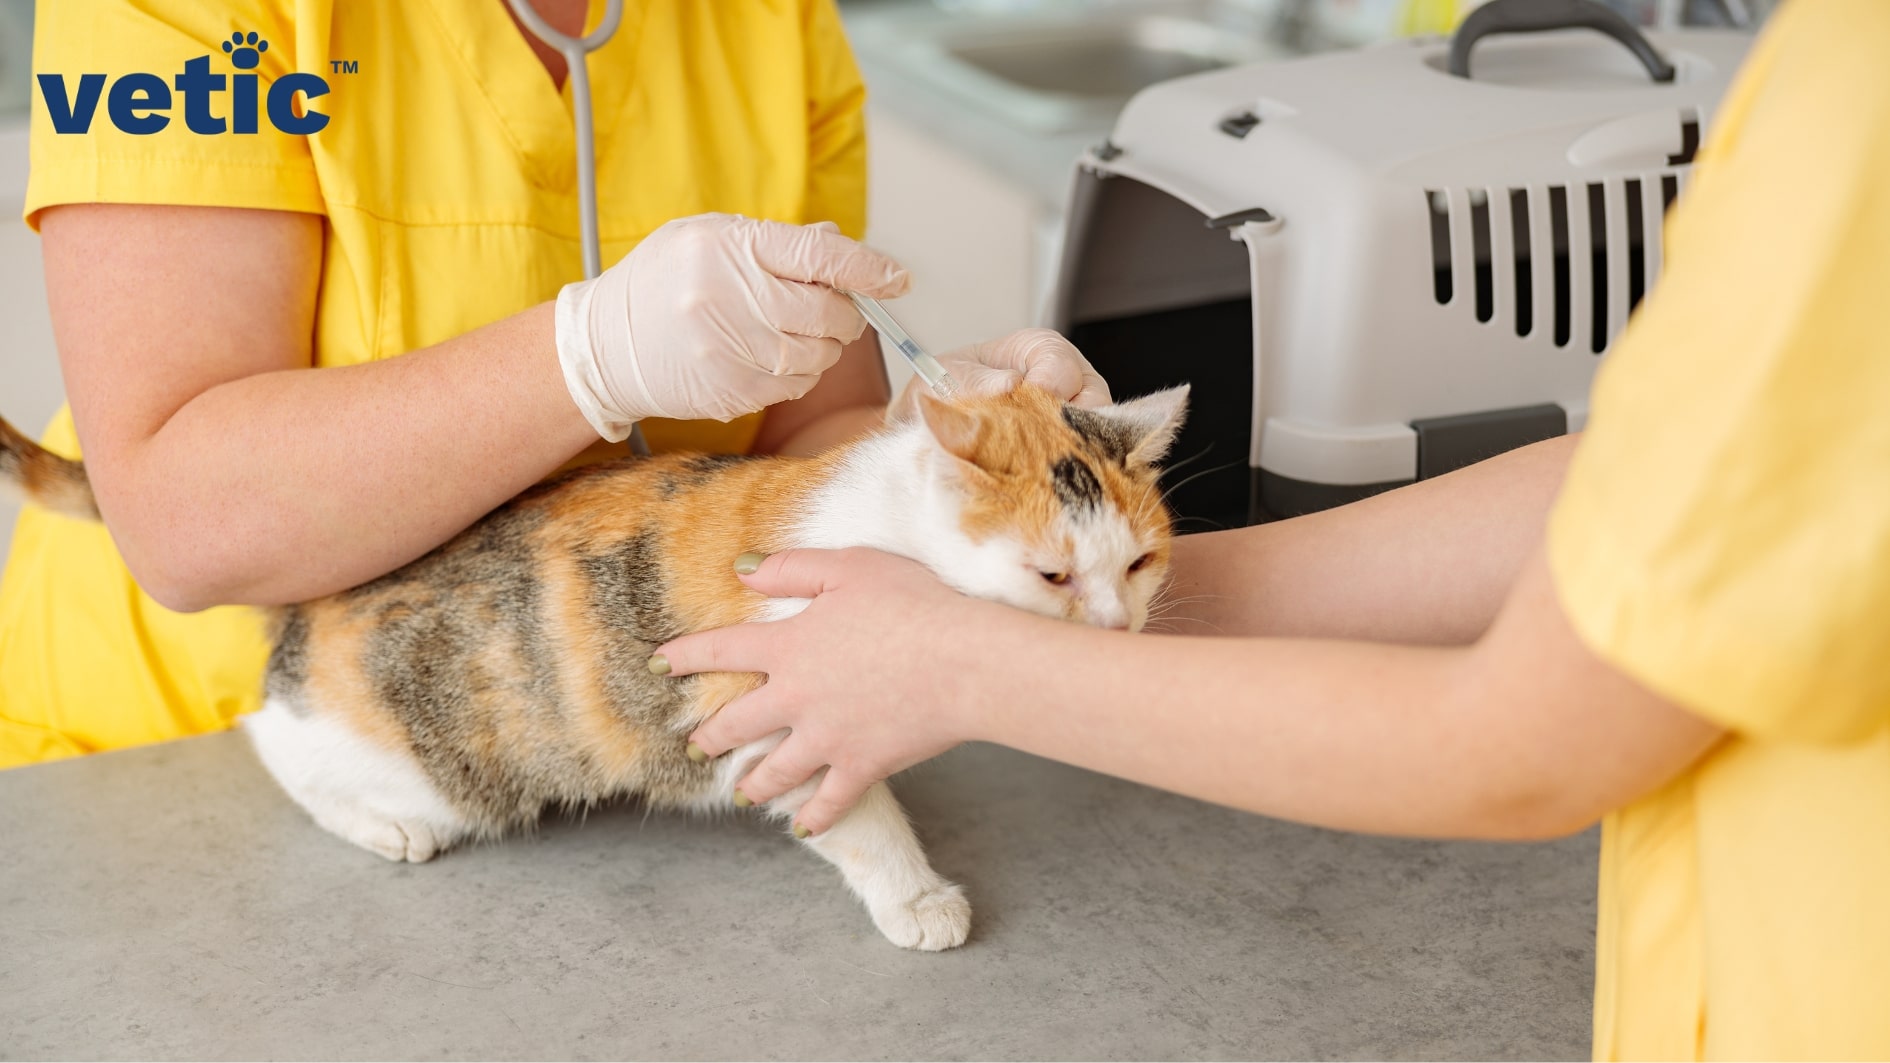 Cats: The Complete Guide to Pet Care